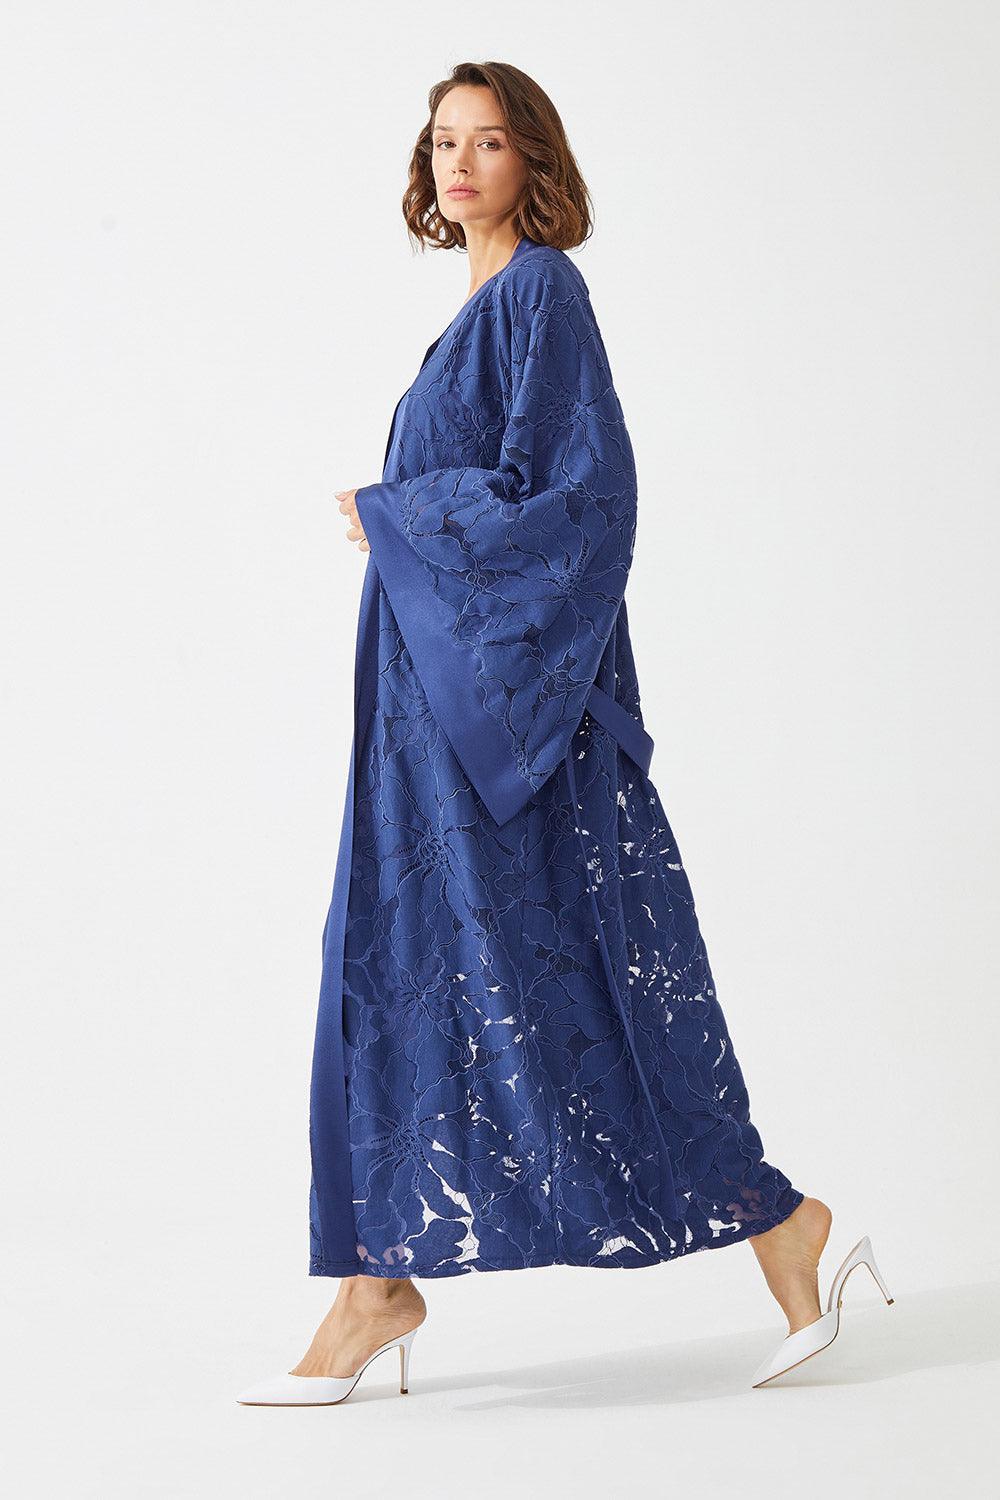 Lobelia Long Full Trimmed with Lace Robe Set - Navy Blue - Bocan